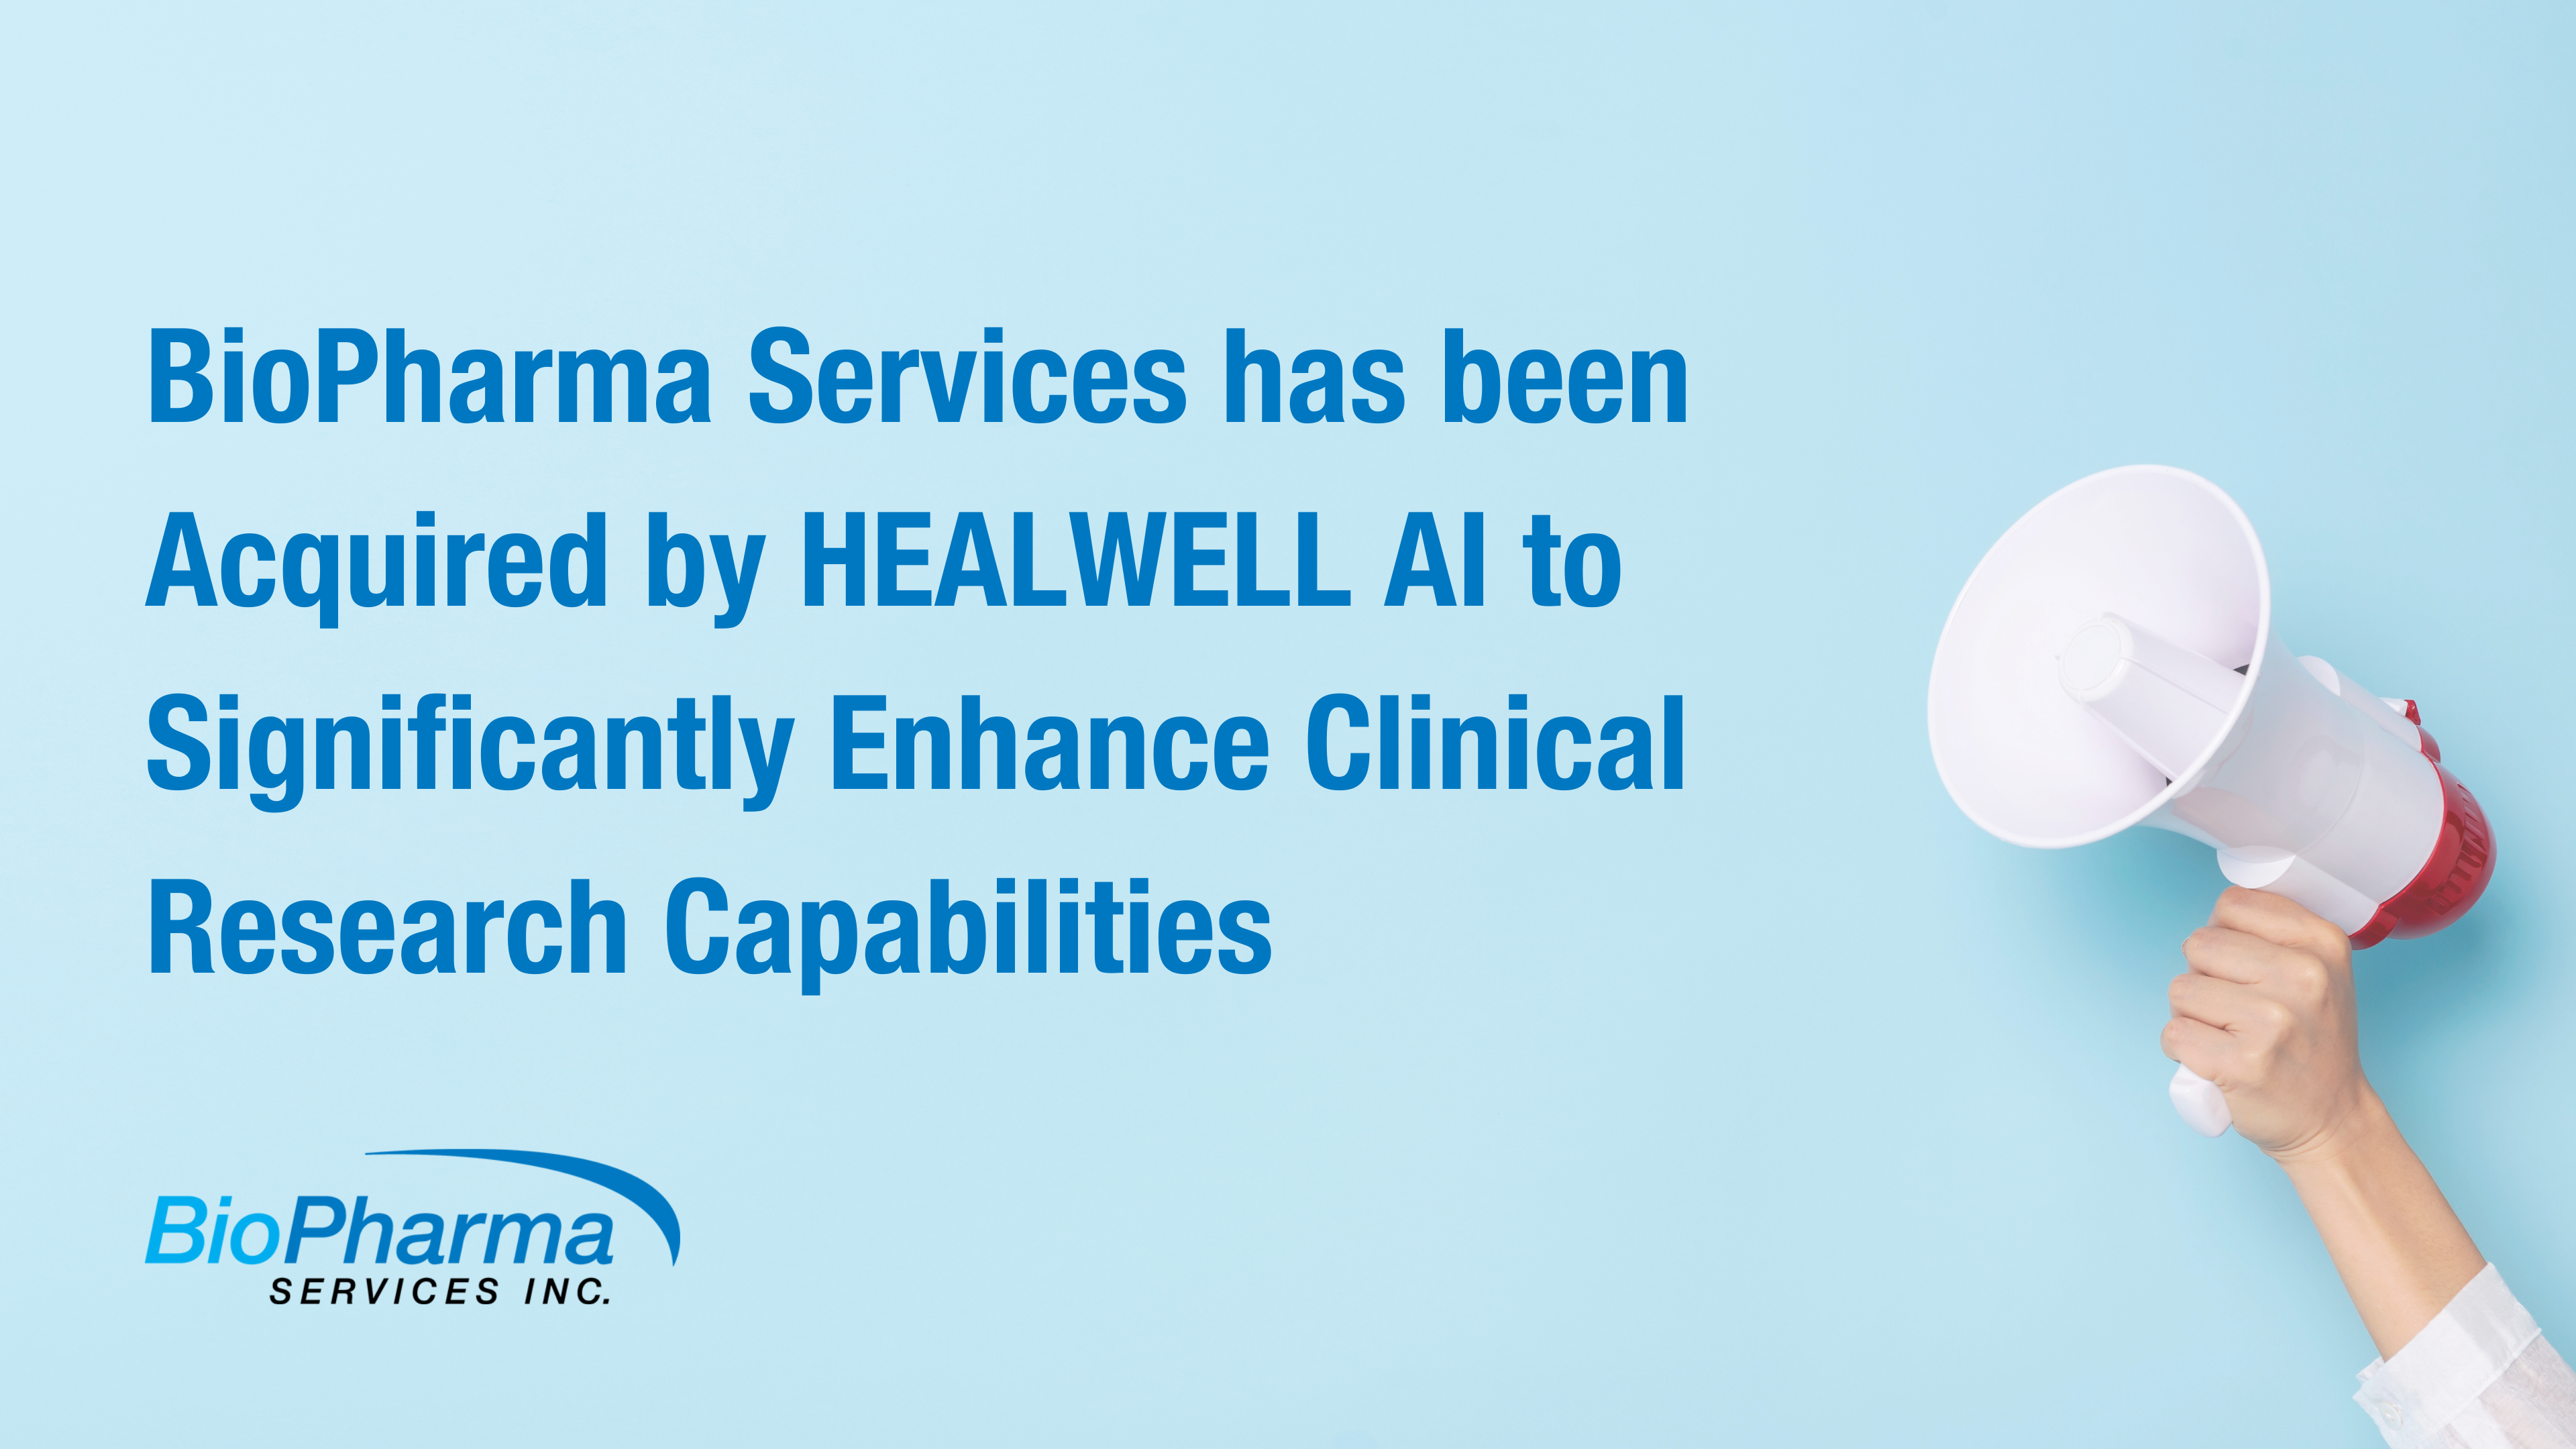 BioPharma Services has been Acquired by HEALWELL AI to Significantly Enhance Clinical Research Capabilities